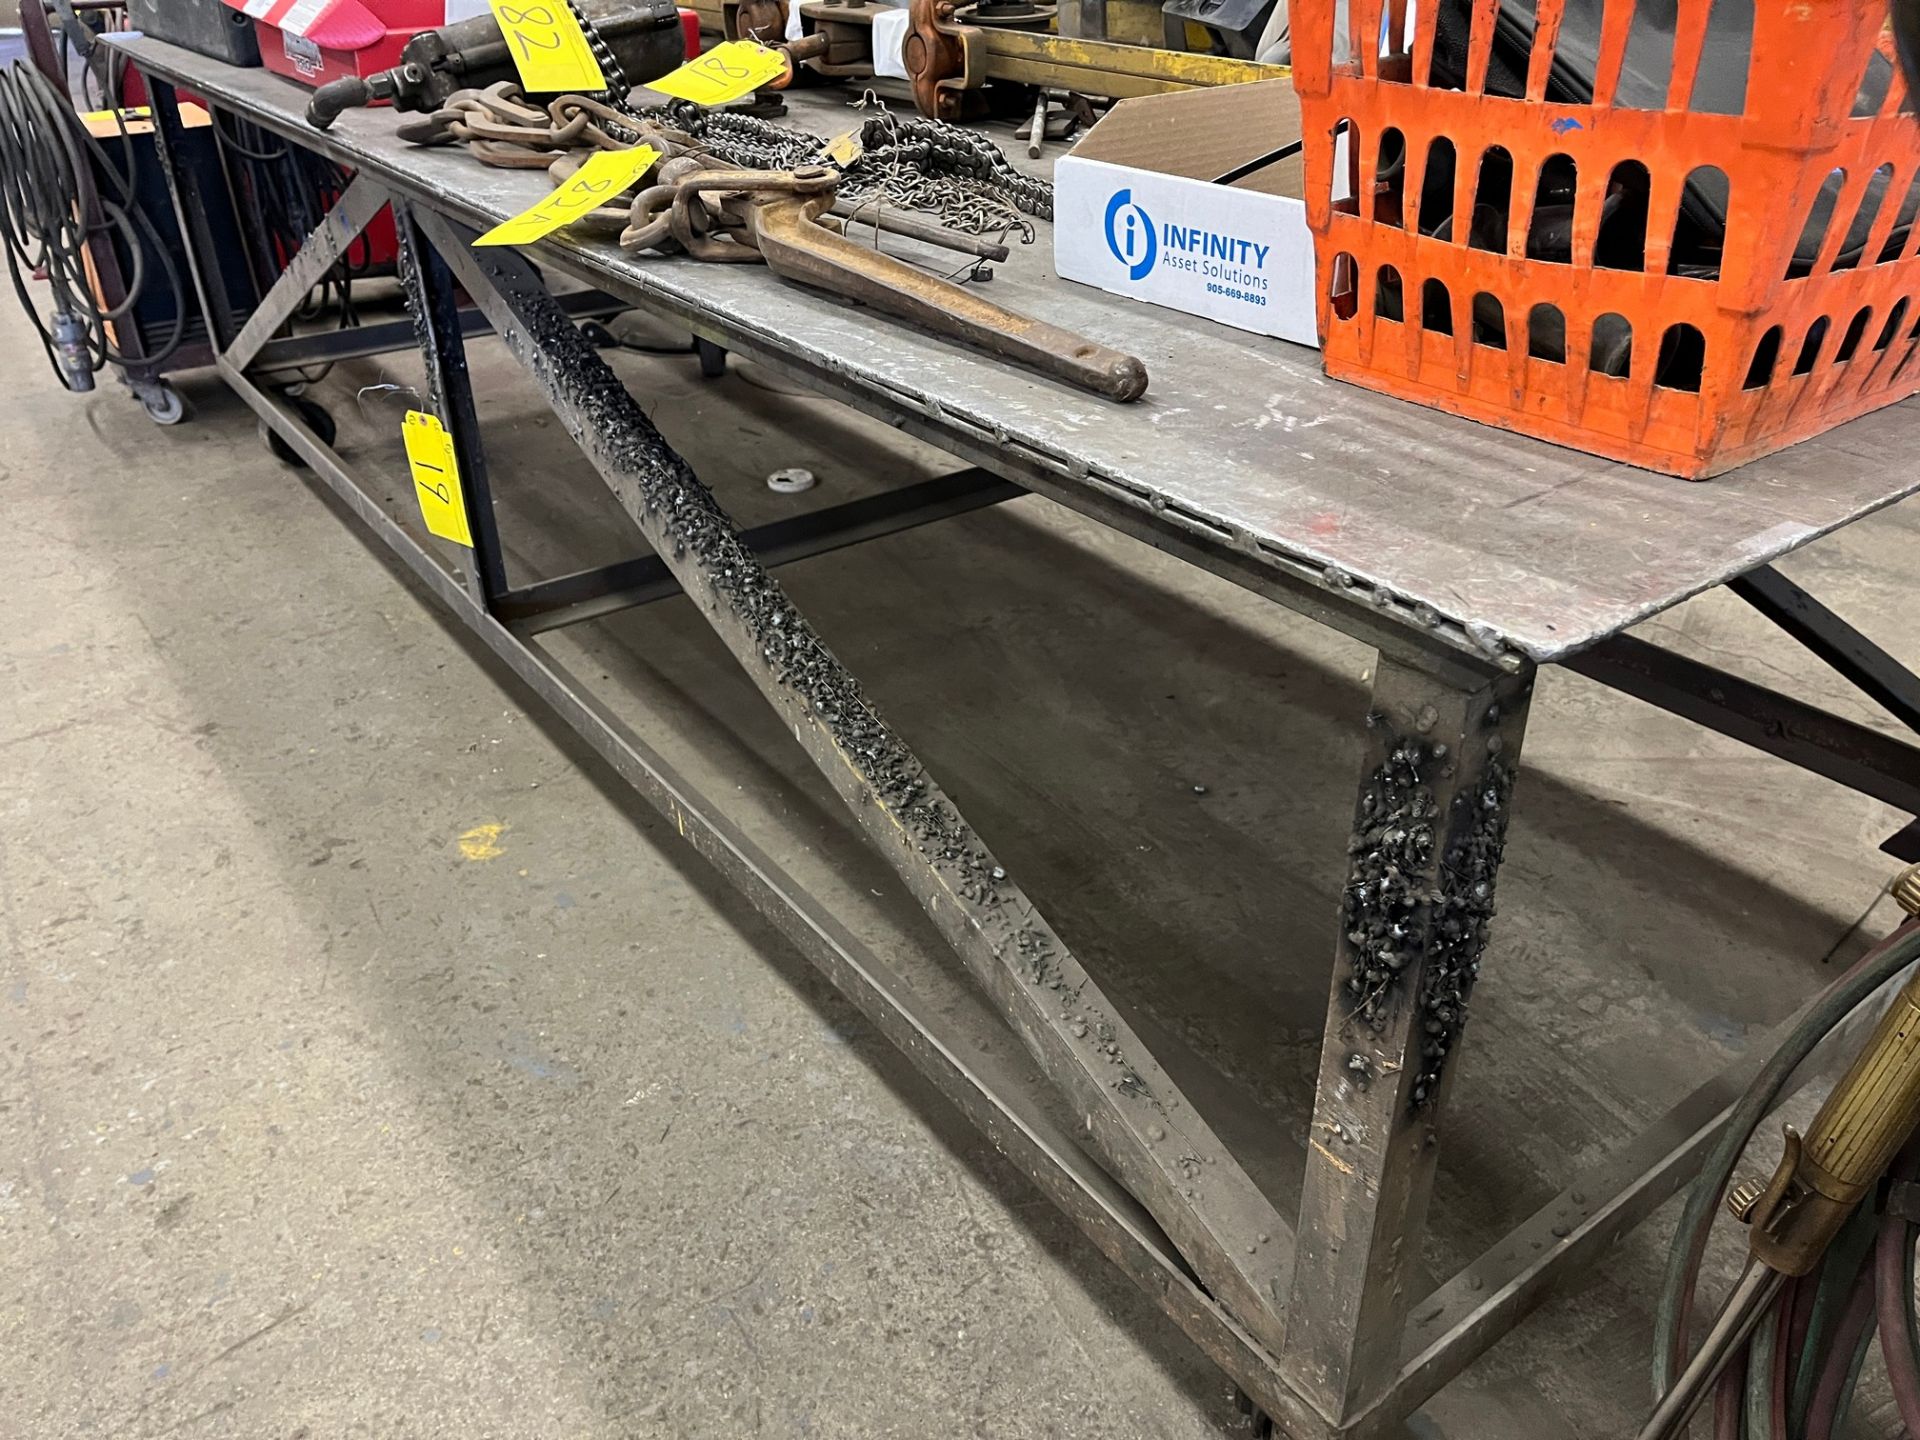 PORTABLE STEEL WELDING TABLE, APPROX. 10'L X 4'W X 1/2" PLATE TOP (NO CONTENTS) - Image 2 of 3